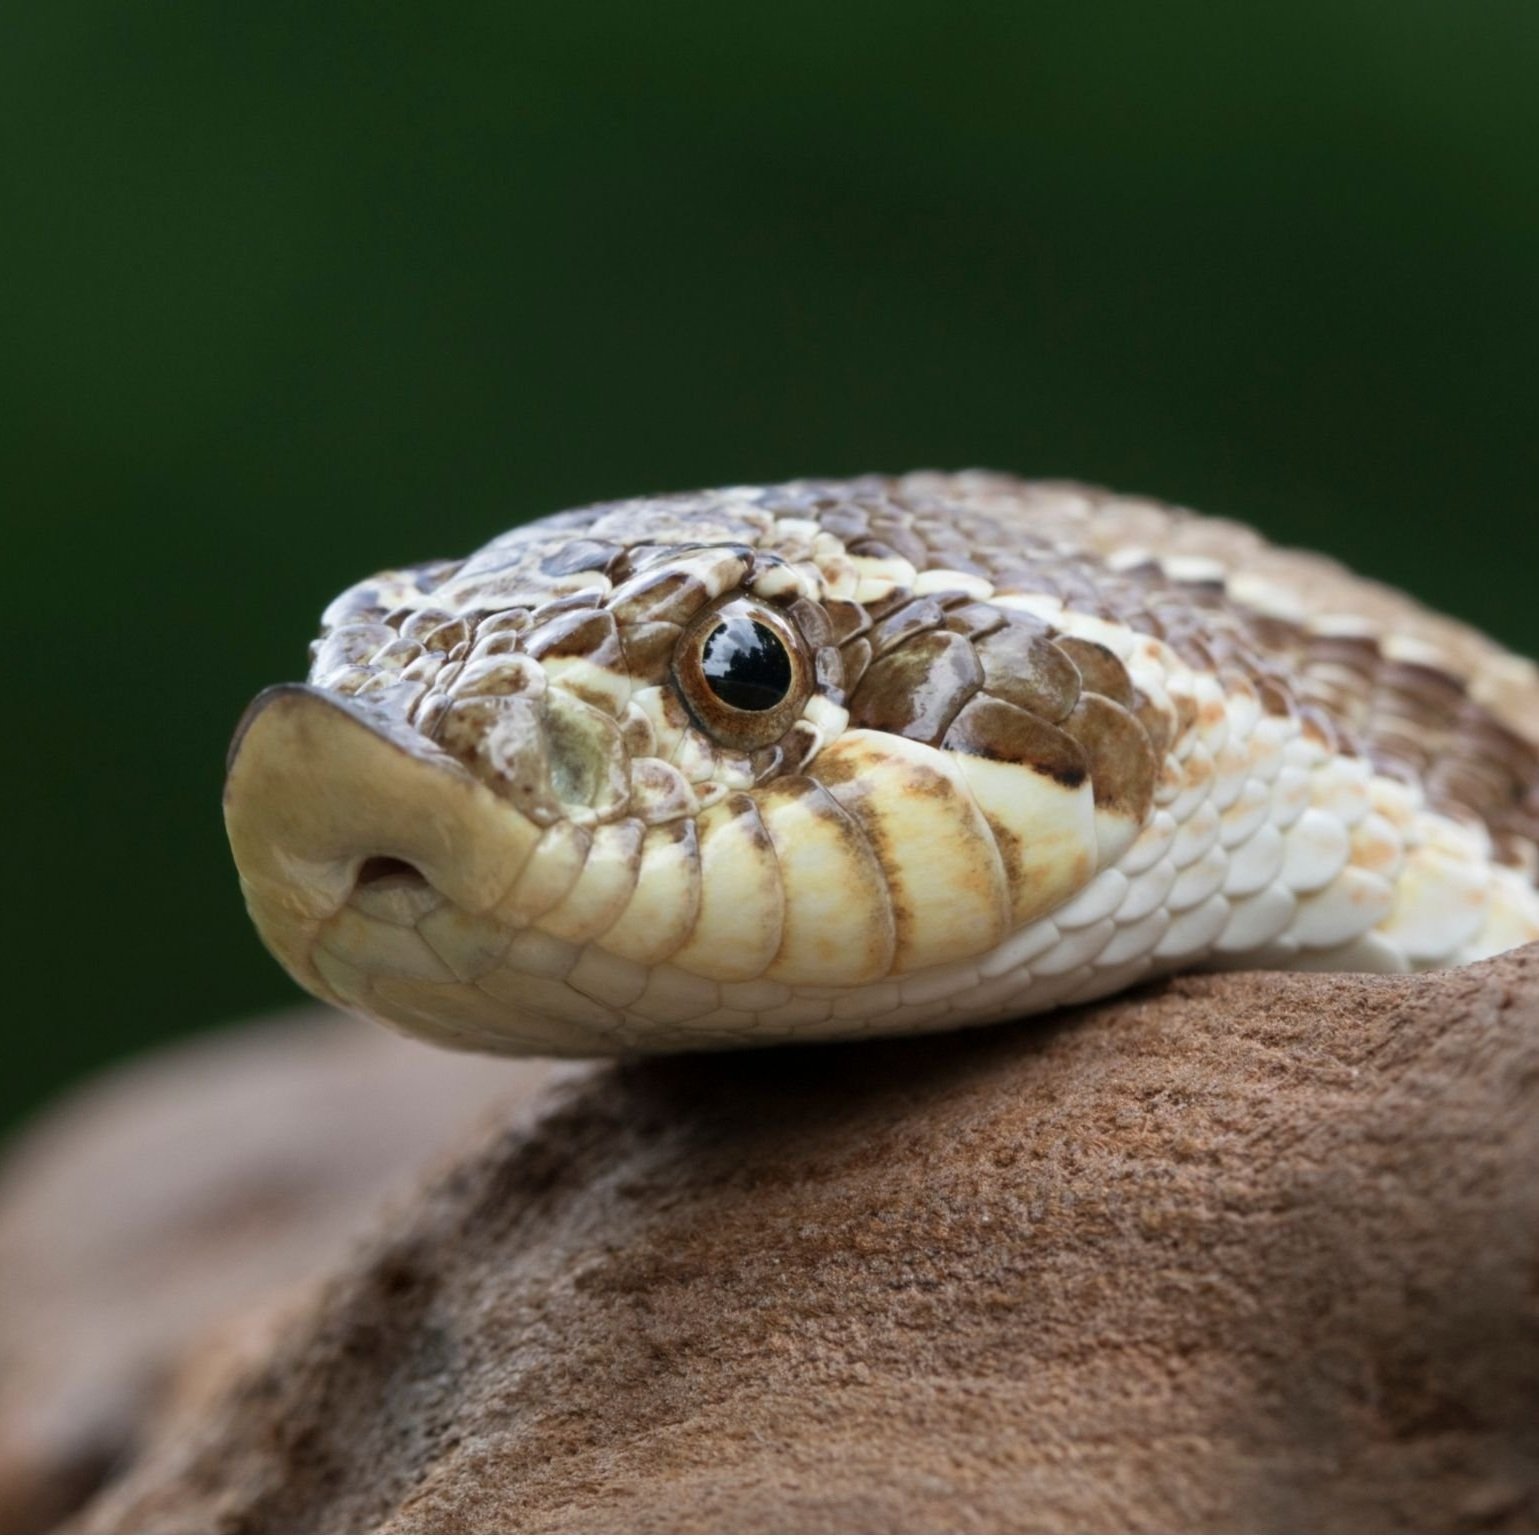 What kind of hognose snakes are we referring to here?